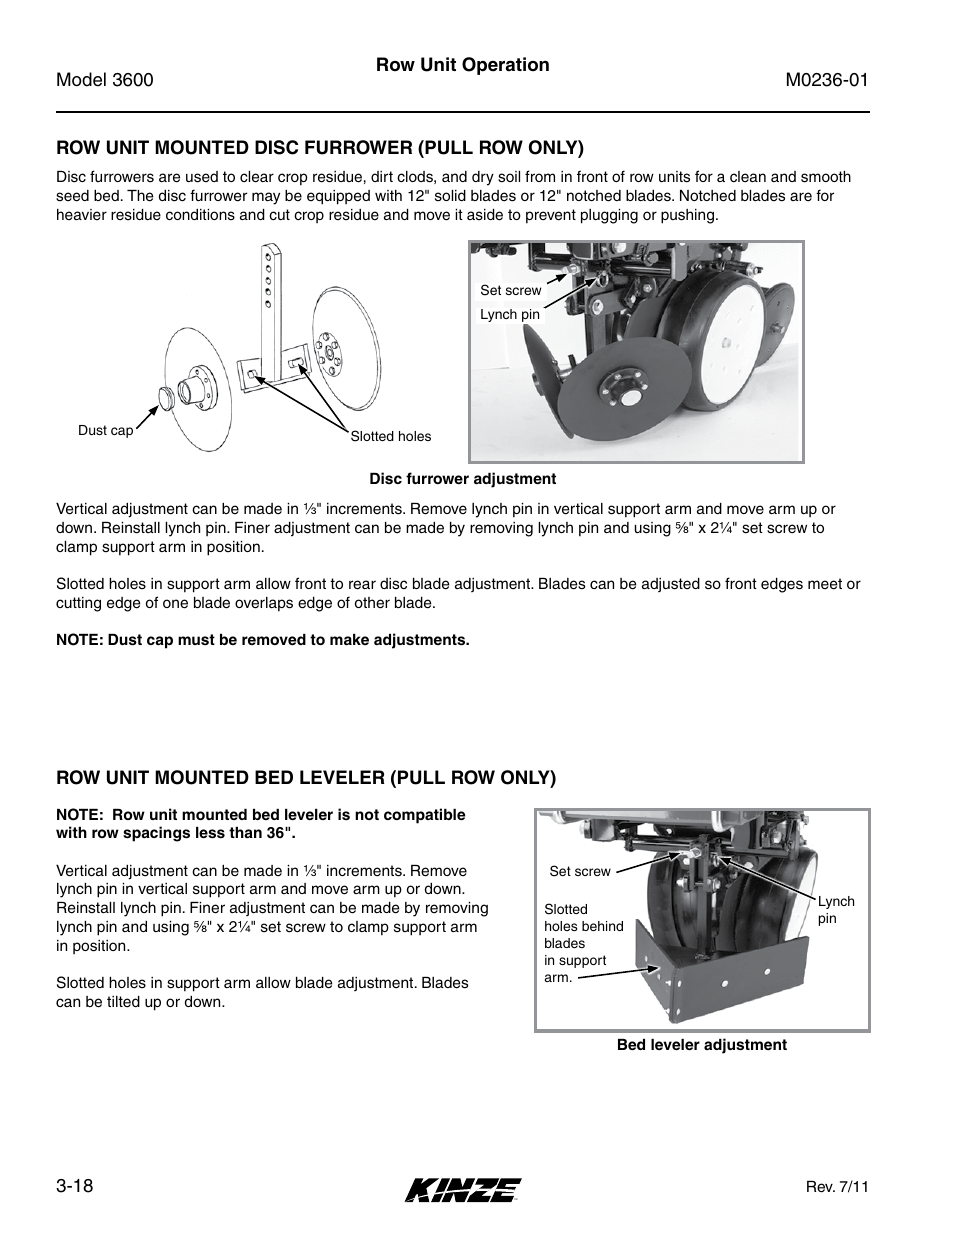 Row unit mounted disc furrower (pull row only), Row unit mounted bed leveler (pull row only), Row unit mounted disc furrower (pull row only) -18 | Row unit mounted bed leveler (pull row only) -18 | Kinze 3600 Lift and Rotate Planter Rev. 7/14 User Manual | Page 62 / 172